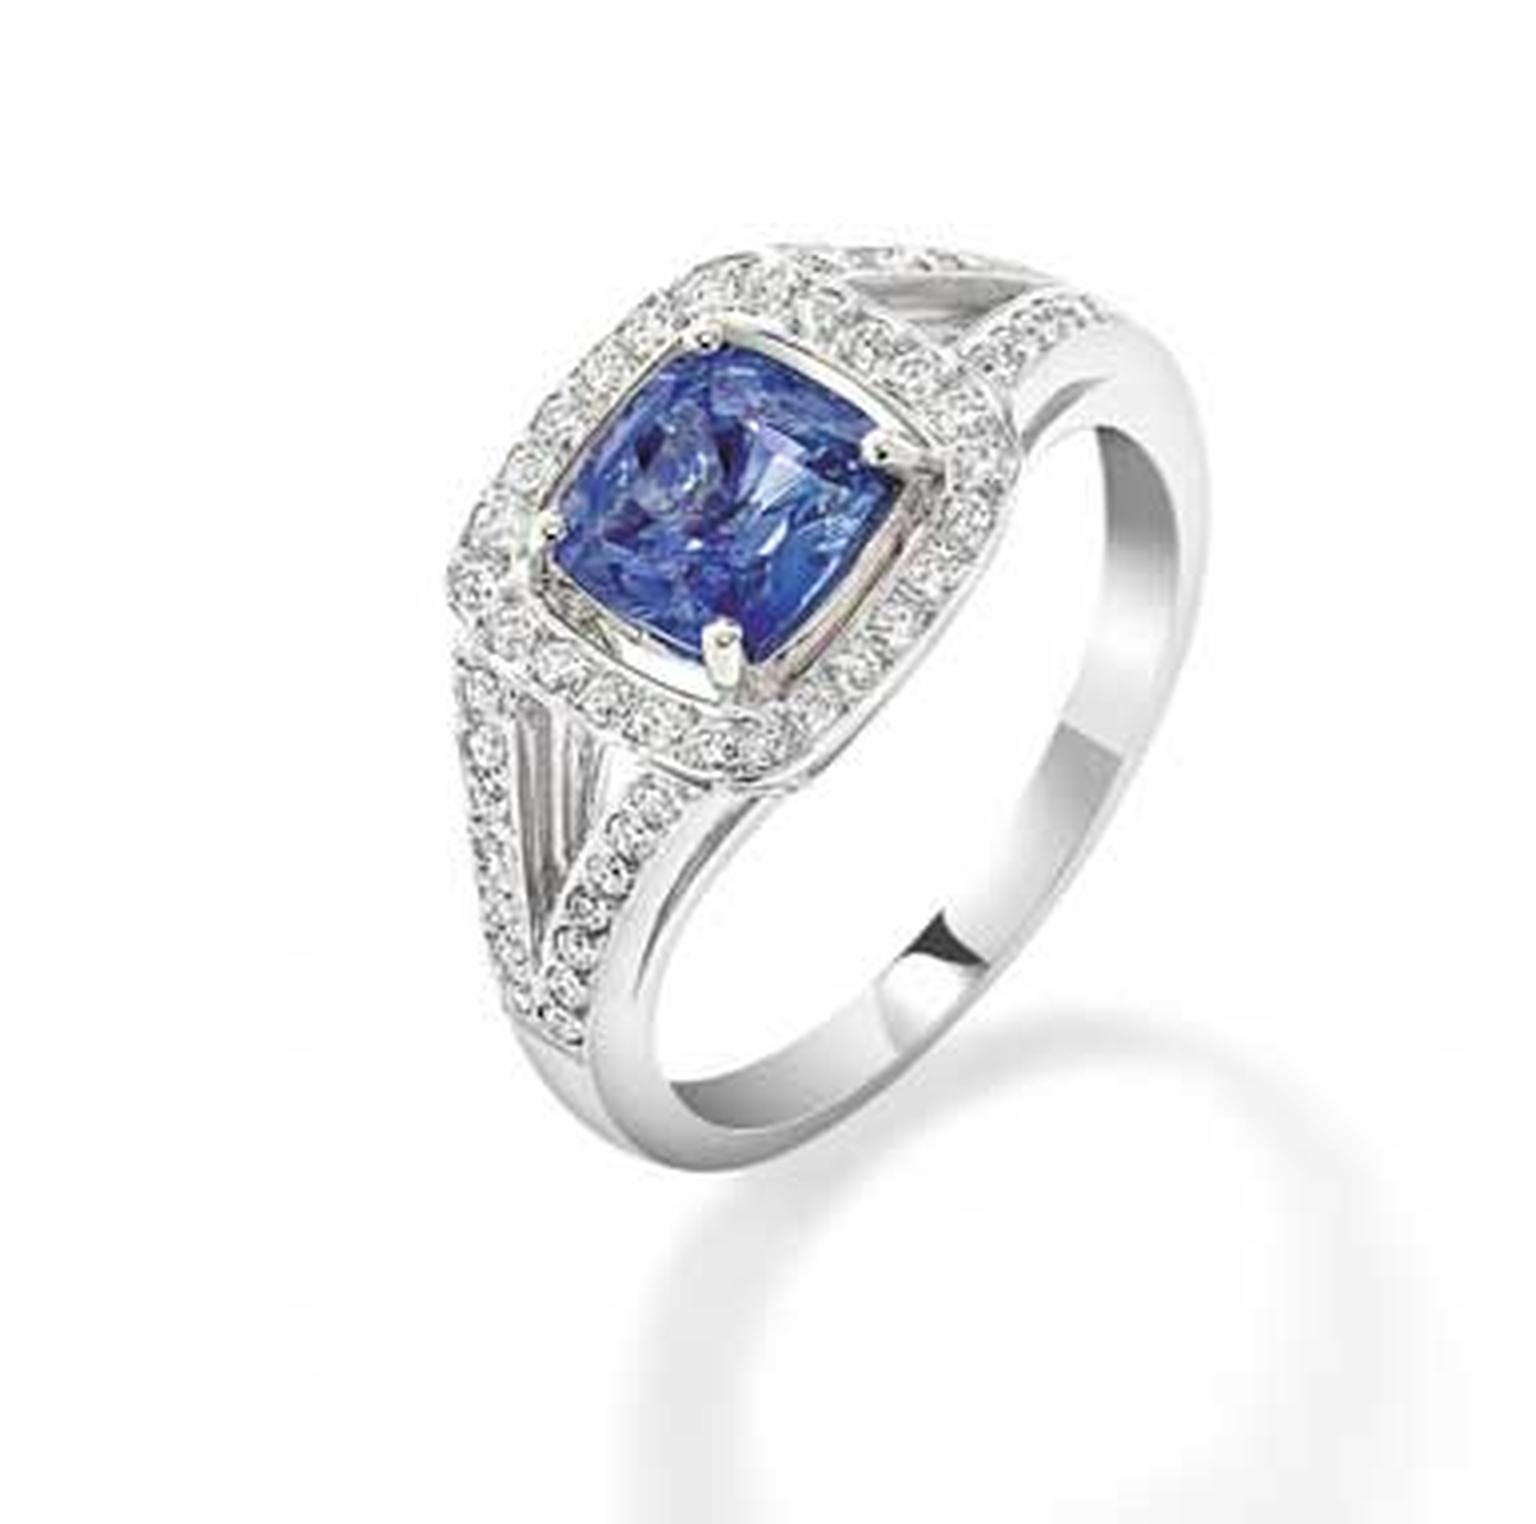 Robinson Pelham Mini Max sapphire engagement ring with a central cushion-cut sapphire and diamonds (available to order).